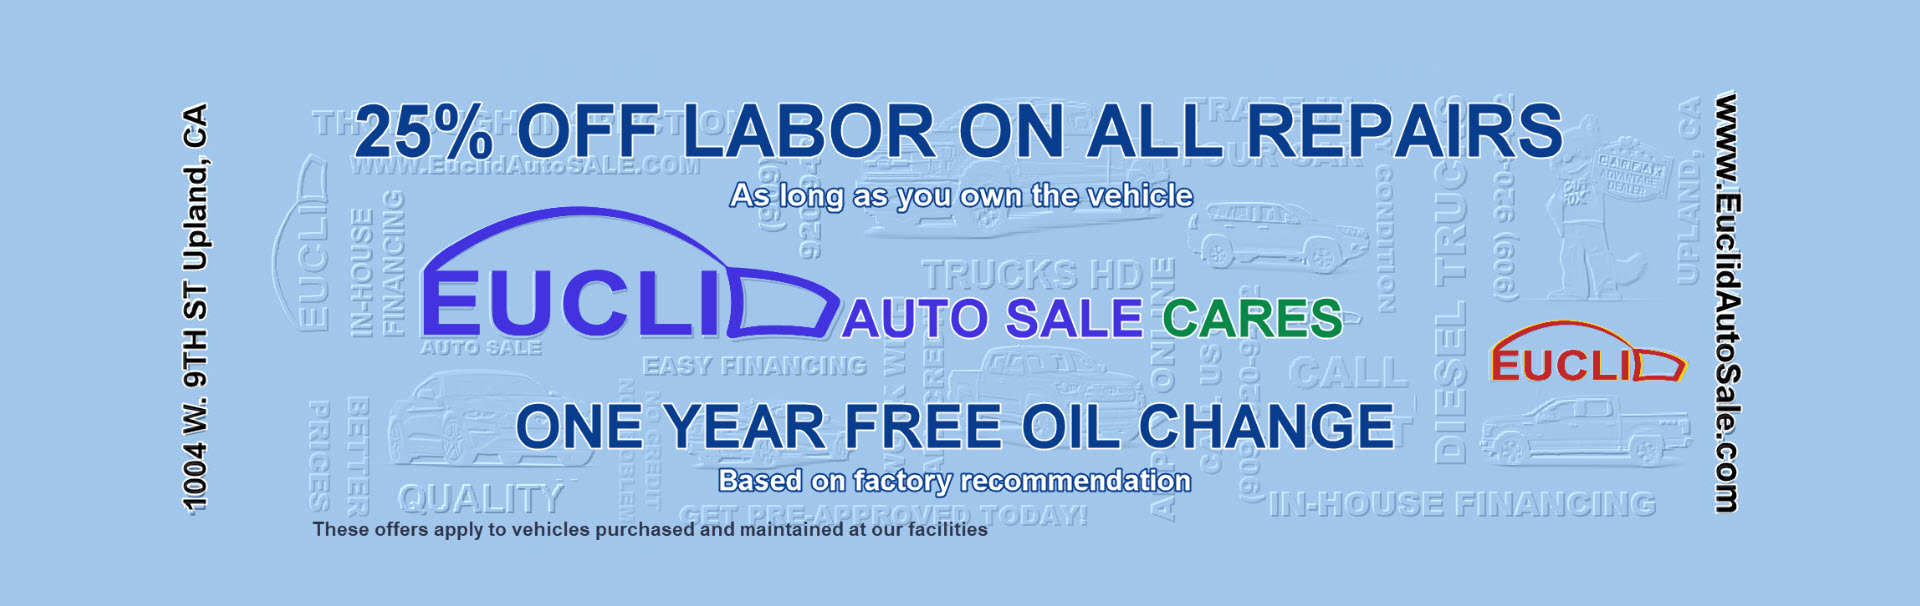 We offer One Year complementary oil change with your purchase